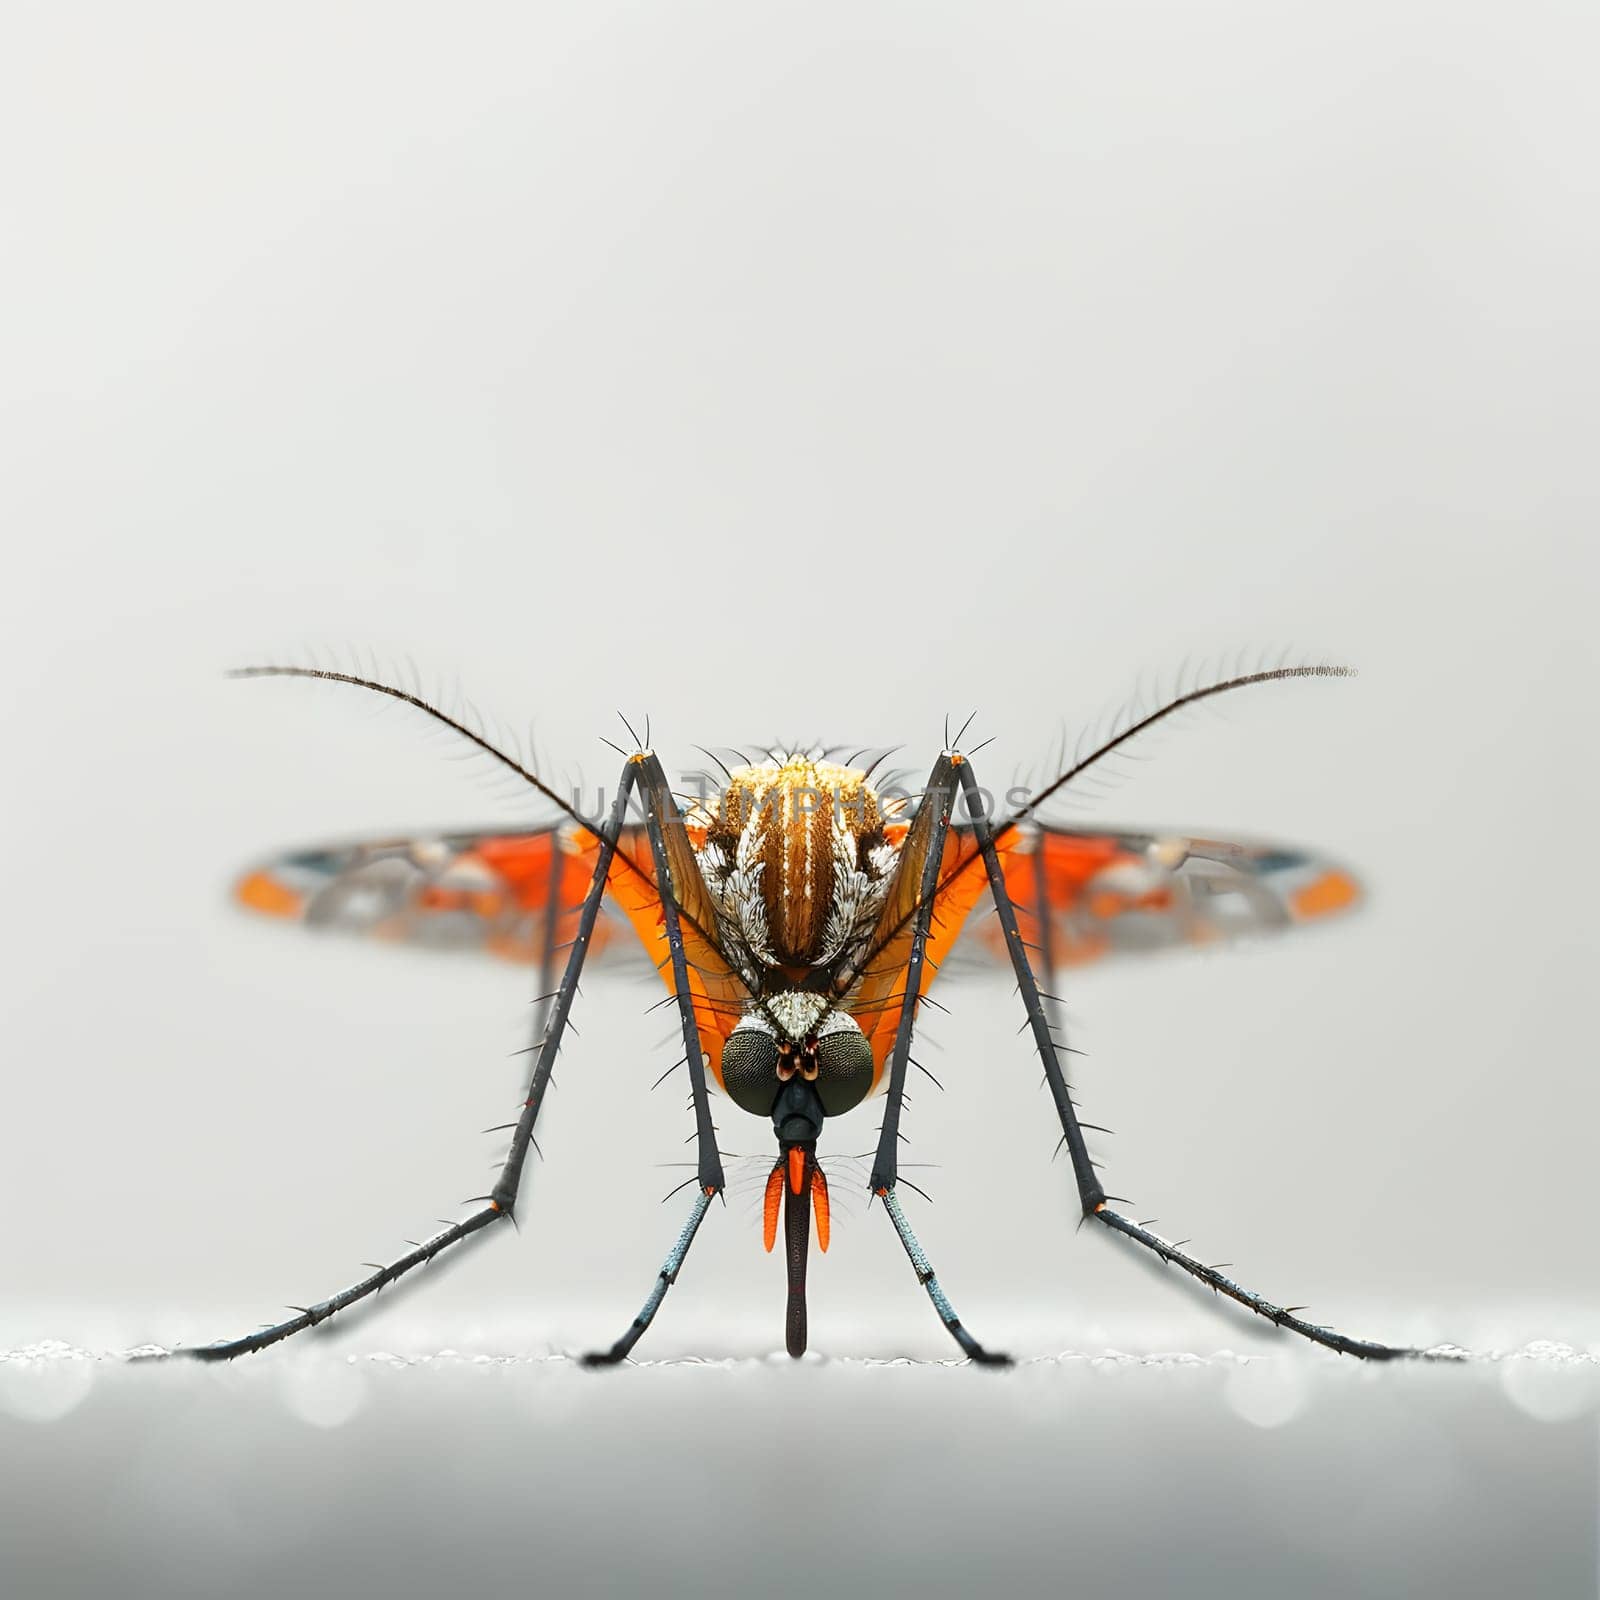 A close up of an Arthropod, Membranewinged insect, or Invertebrate, such as a mosquito, resting on a white surface, showcasing its intricate Wing symmetry